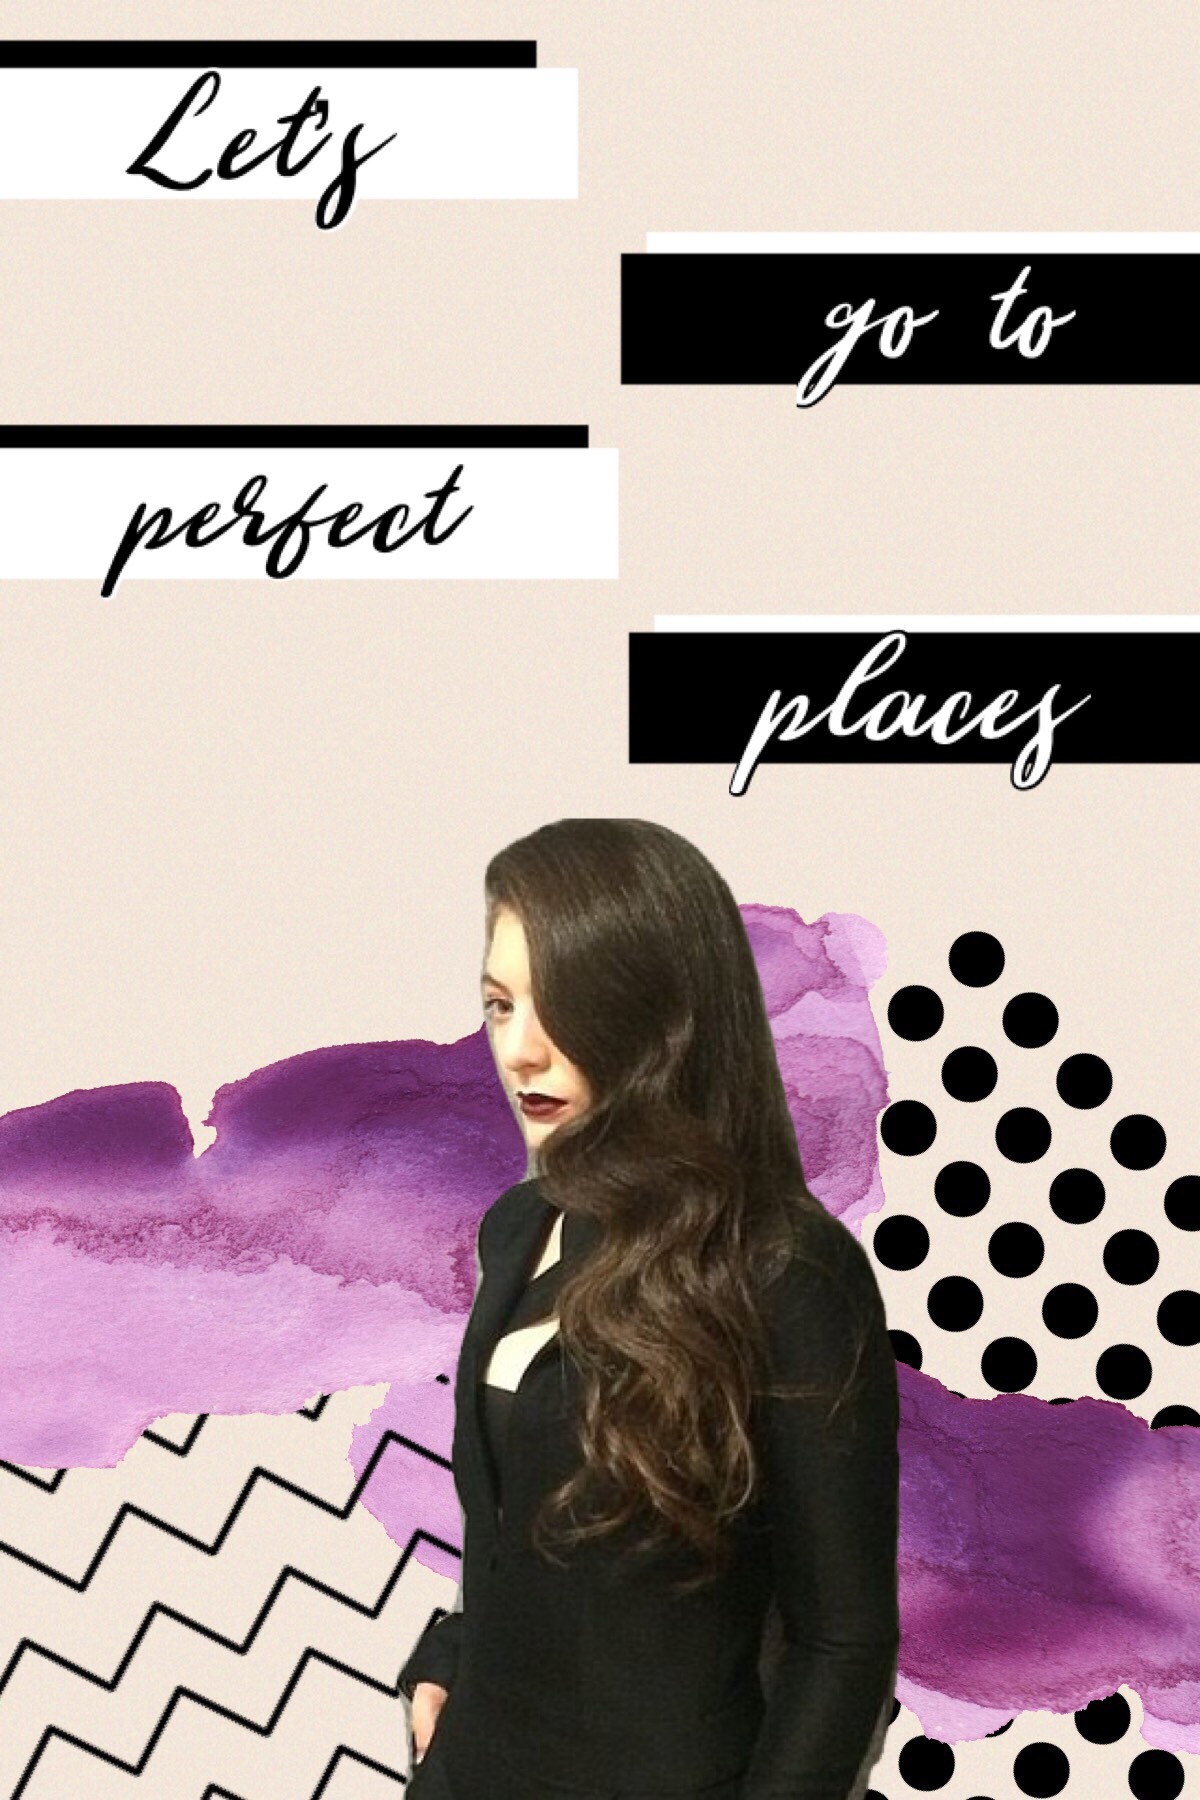 Perfect Places - Lorde (tap)
Inspired by -apollo-

Welcome back!

I’m bored
Should I do a
👢Face Reveal👢
Or maybe just a
🐝Bitmoji reveal🐝
I did a Bitmoji reveal last night but only left it up for an hour.